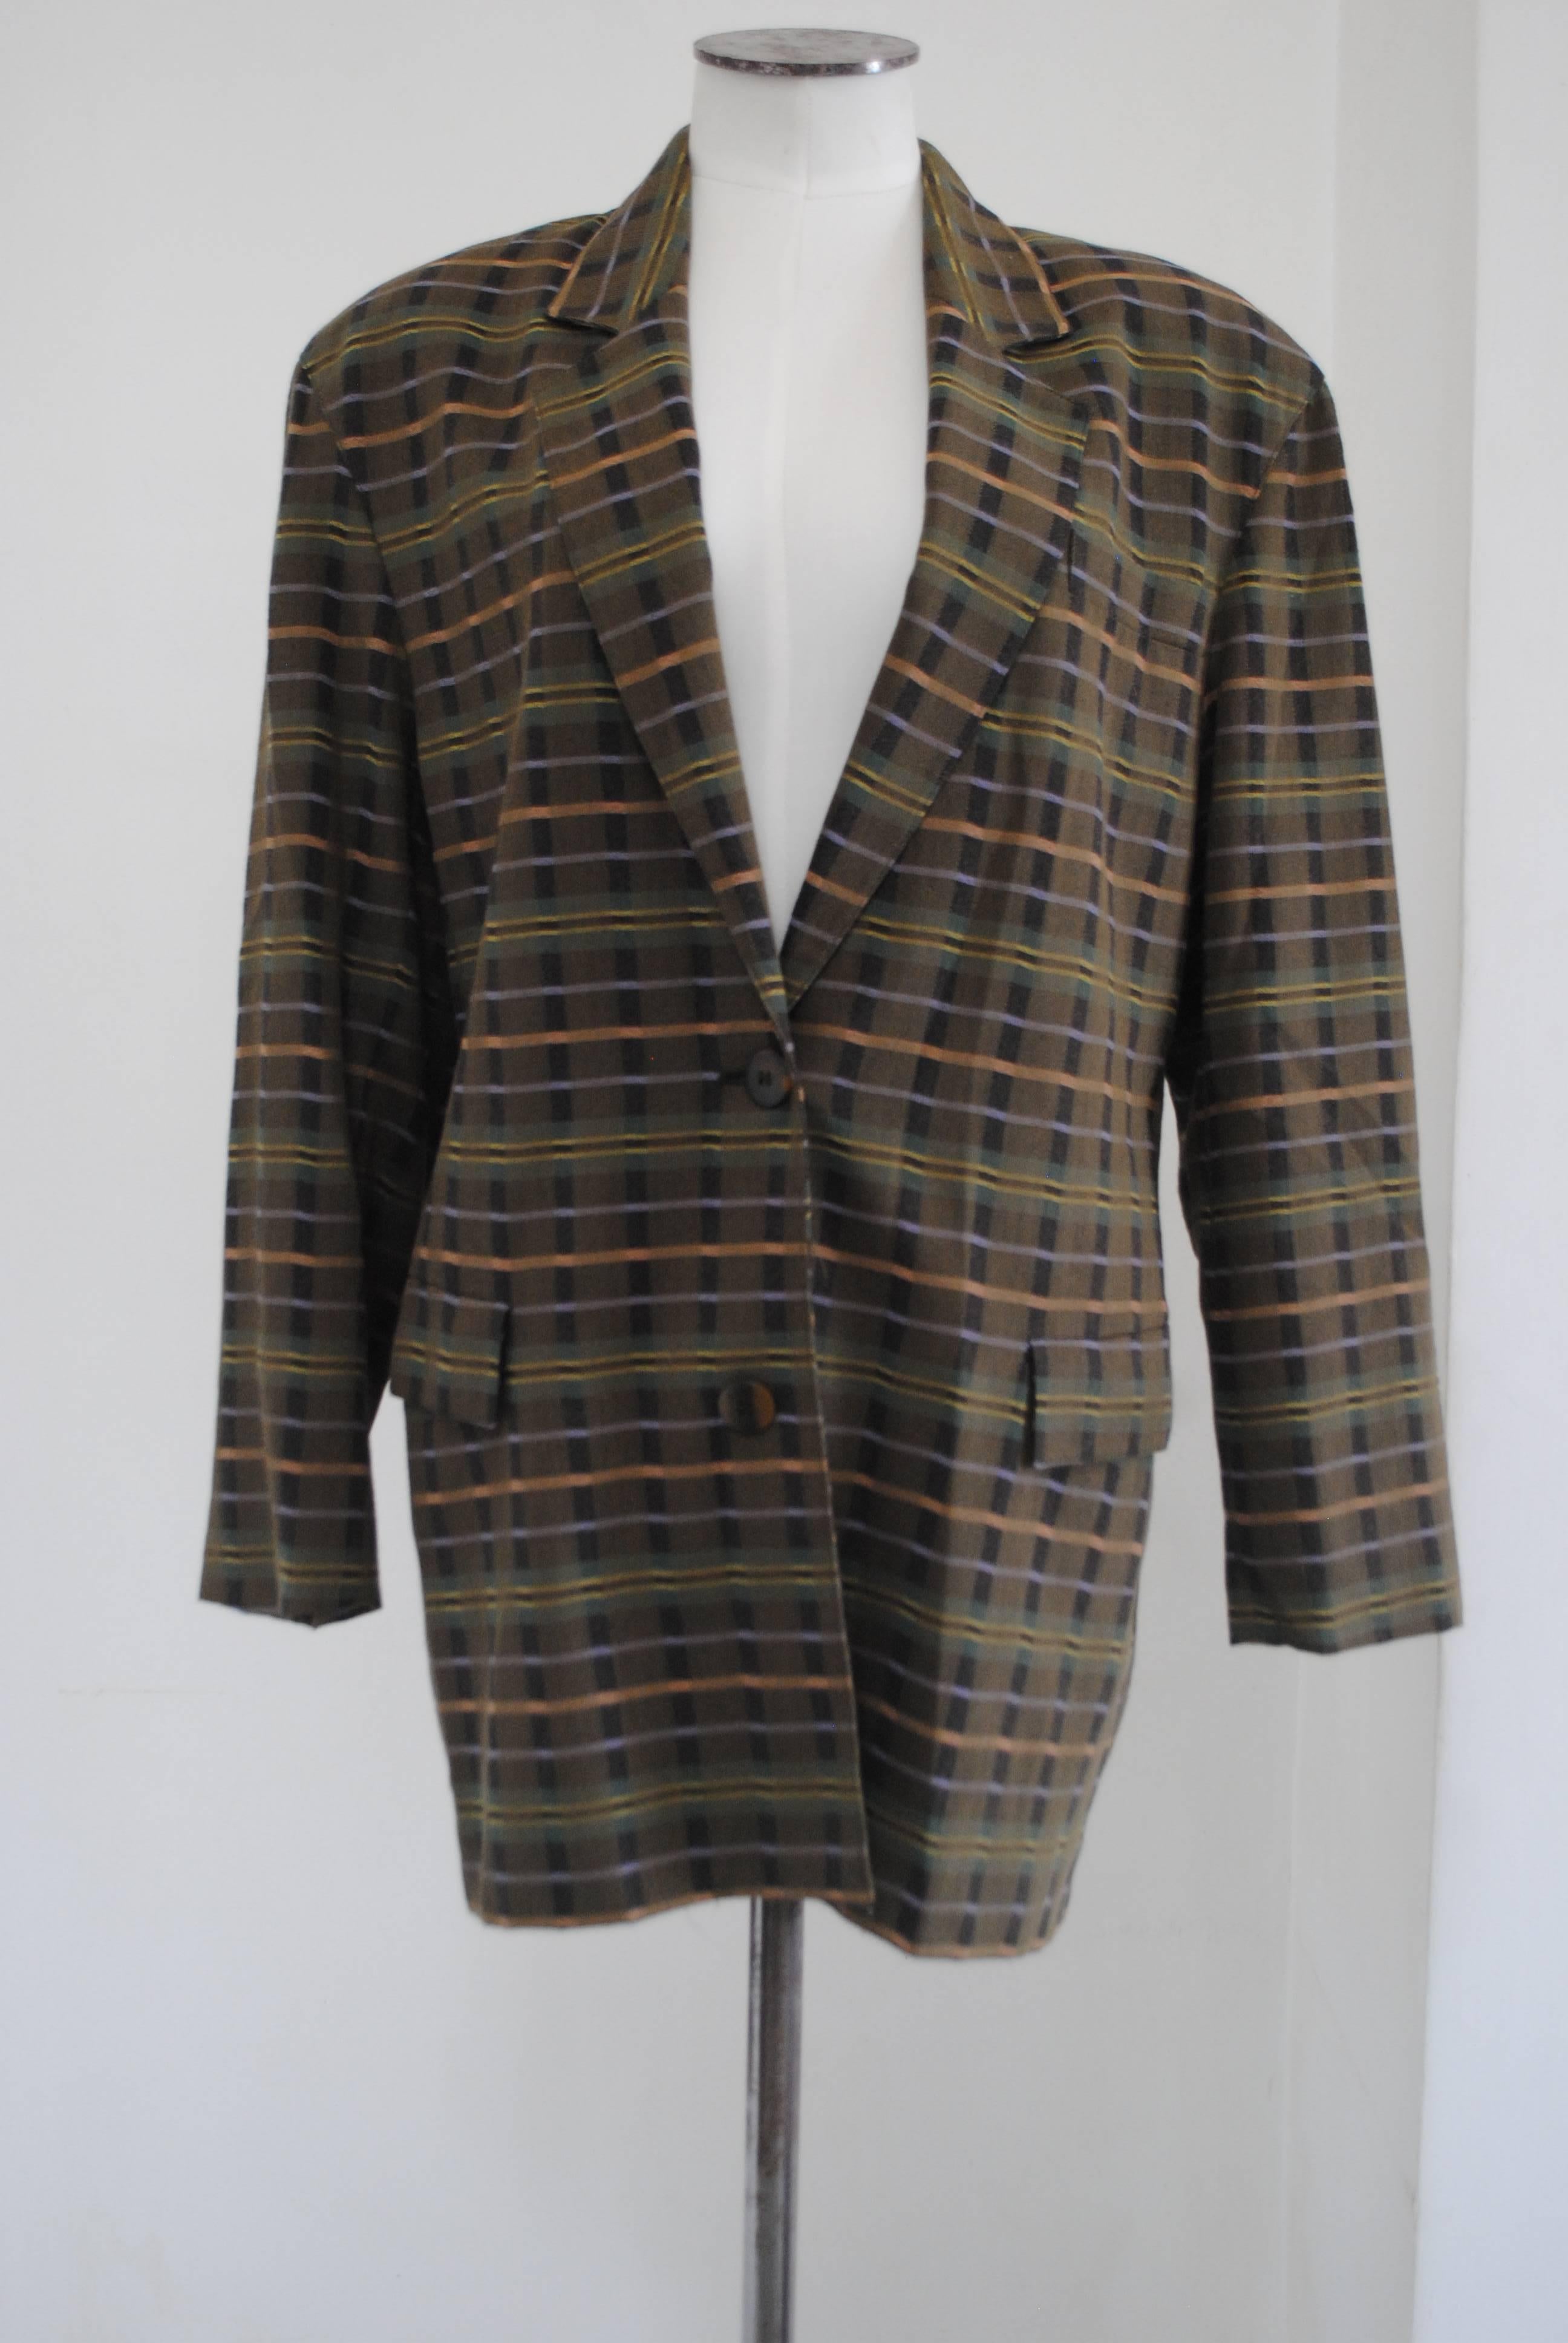 Missoni Green Jacket

Totally made in italy in italian size range 44